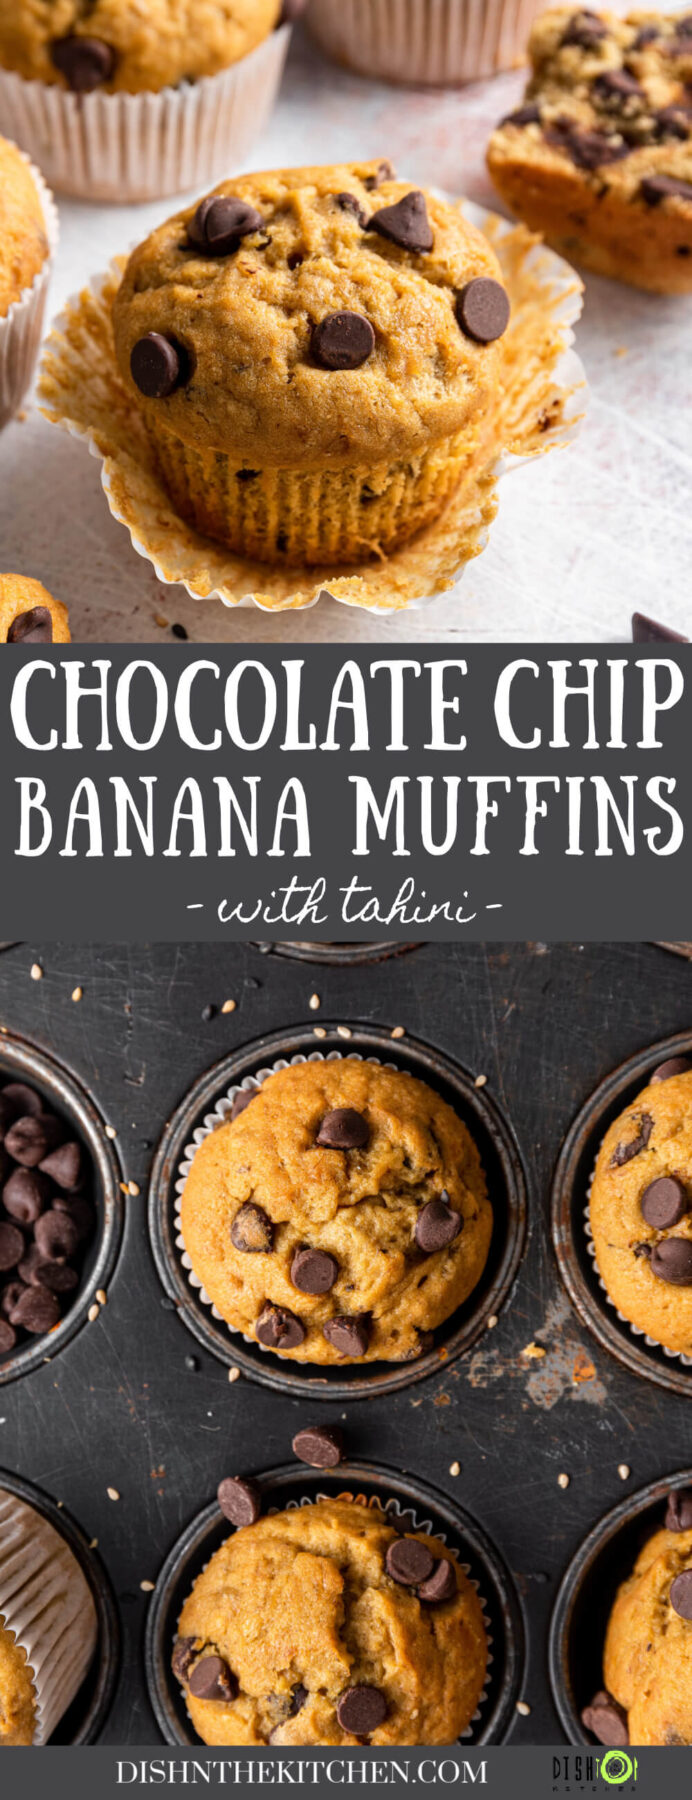 Pinterest image featuring several golden baked Tahini Chocolate Chip Banana Muffins.